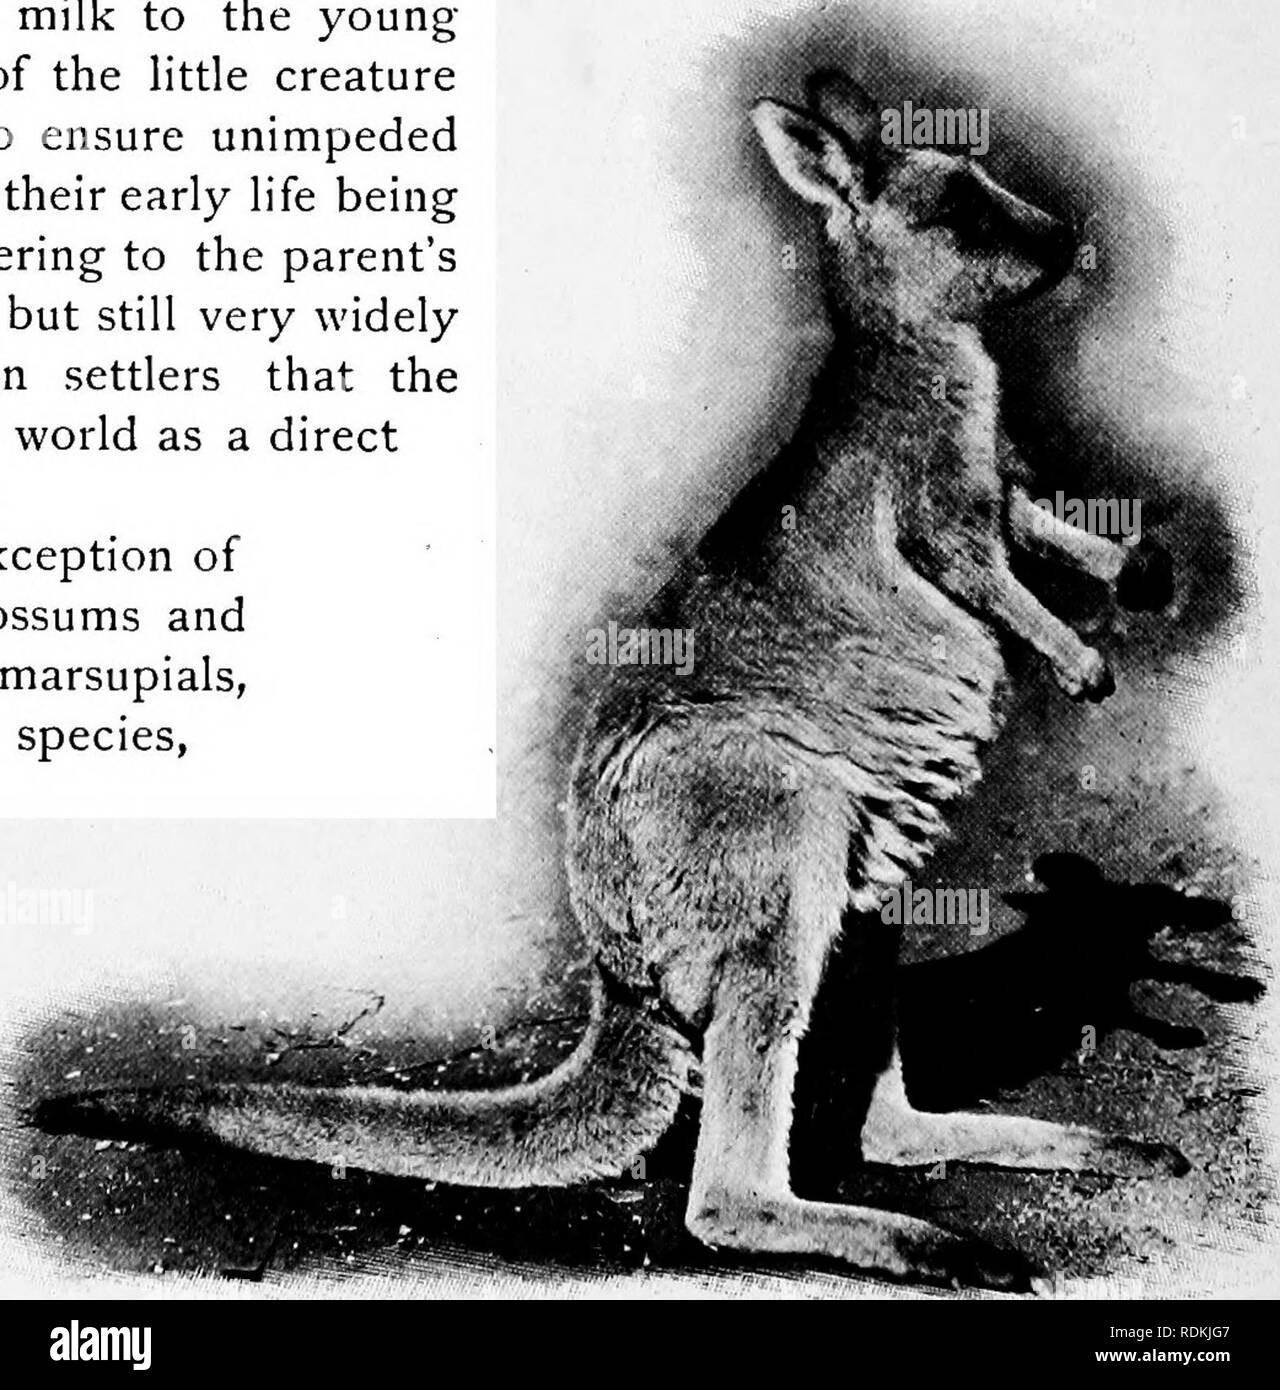 . Mammals of other lands;. Mammals. CHAPTER XXII MARSUPIALS AND MONOTREMES BY W. SAVILLE-KENT, F.L.S., F.Z.S. MARSUPIALS WITH the order of the Pouched Mammals we arrive — with the exception of the Echidna and Platypus, next described — at the most simply organised representatives of the Mammalian Class. In the two forms above named, egg-production, after the manner of birds and reptiles, constitutes the only method of propagation. Although among marsupials so rudimentary a method of reproduction is not met with, the young are brought into the world in a far more embryonic condition than occurs Stock Photo